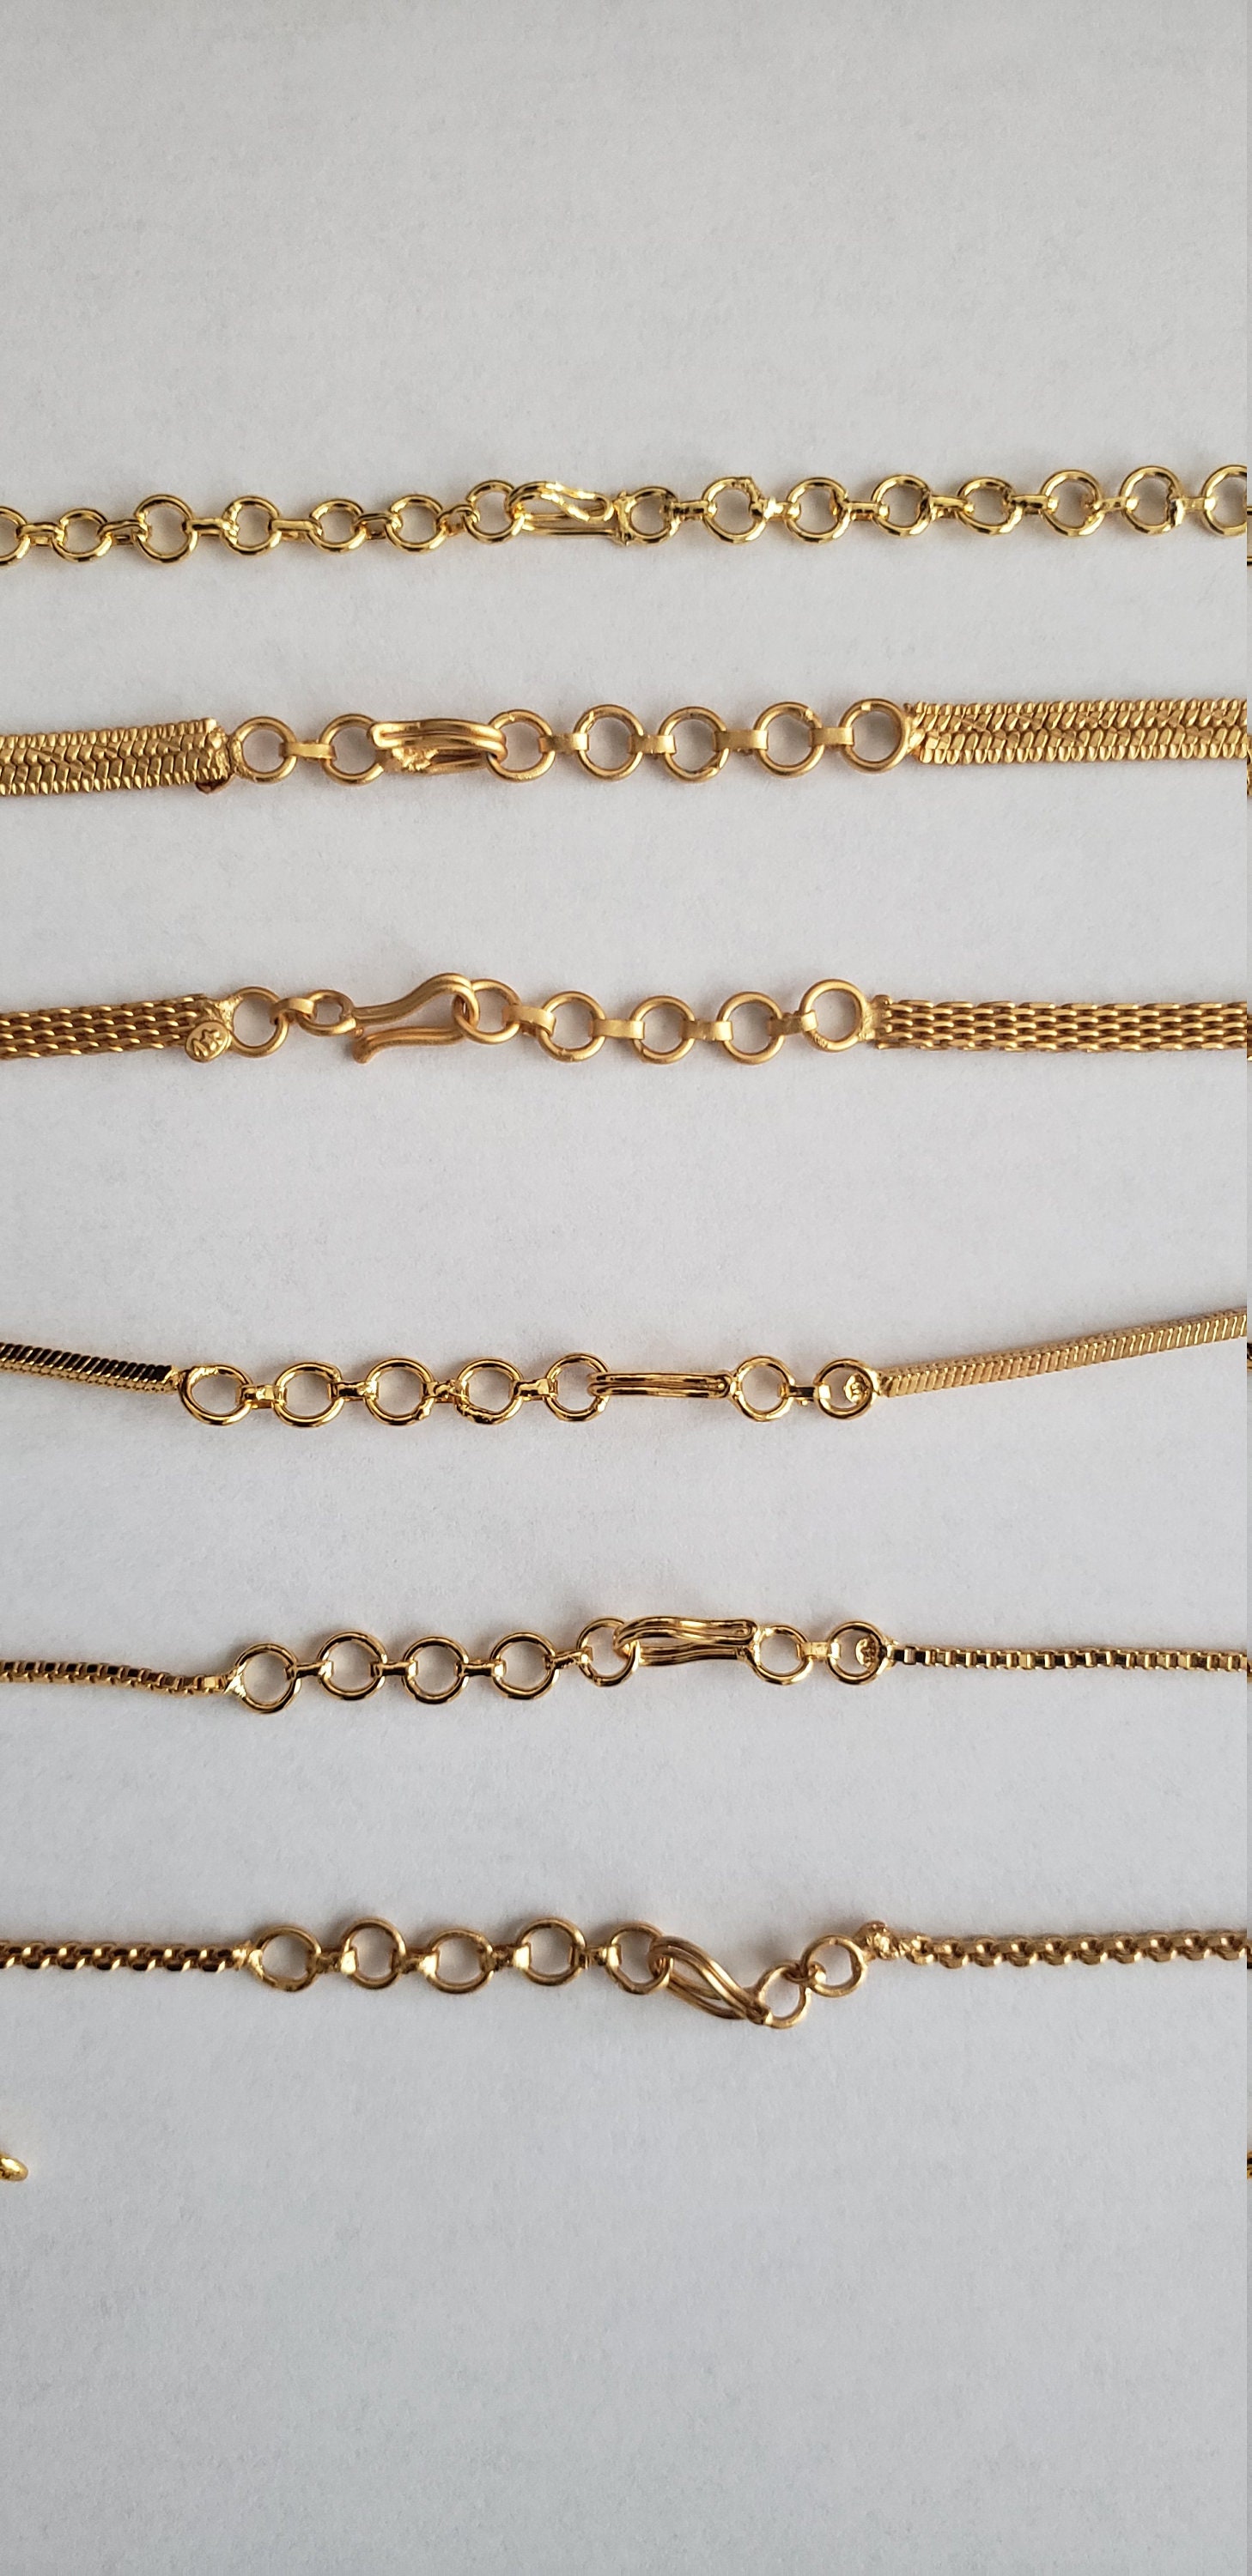 24k Gold Color Covering Extensions or Matt Finish Gold Bracelet Extender,  Adjustable Extension Chain, Chain/ Necklace Extensions 